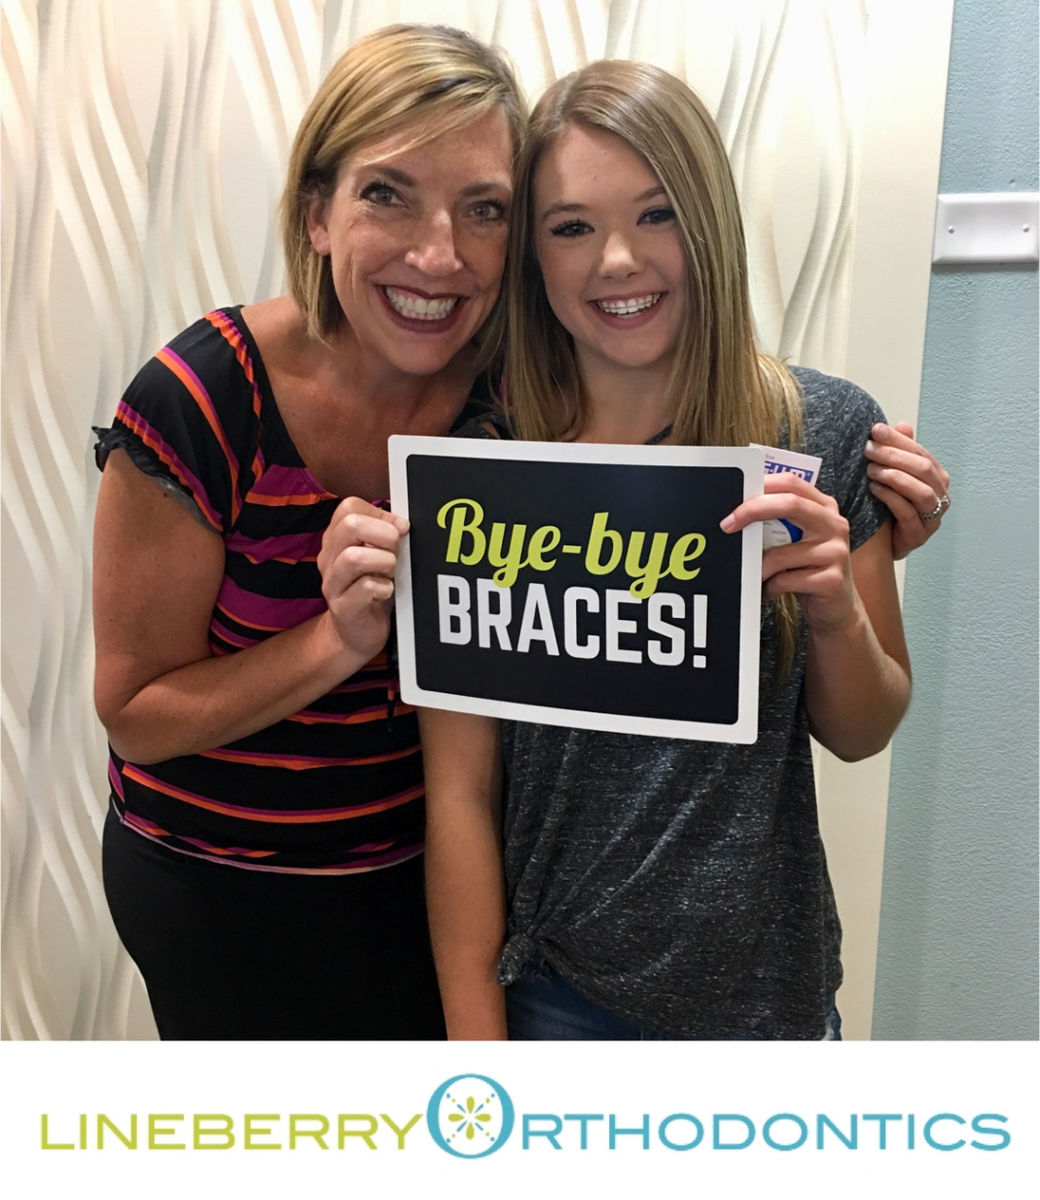 Today is DEBOND DAY! We had so many beautiful new smiles walk out of our doors, and Laura’s looks SO great! Congratulations Laura, and thank you for partying with us on debond day! #lineberryortho #pearlywhites #debondday